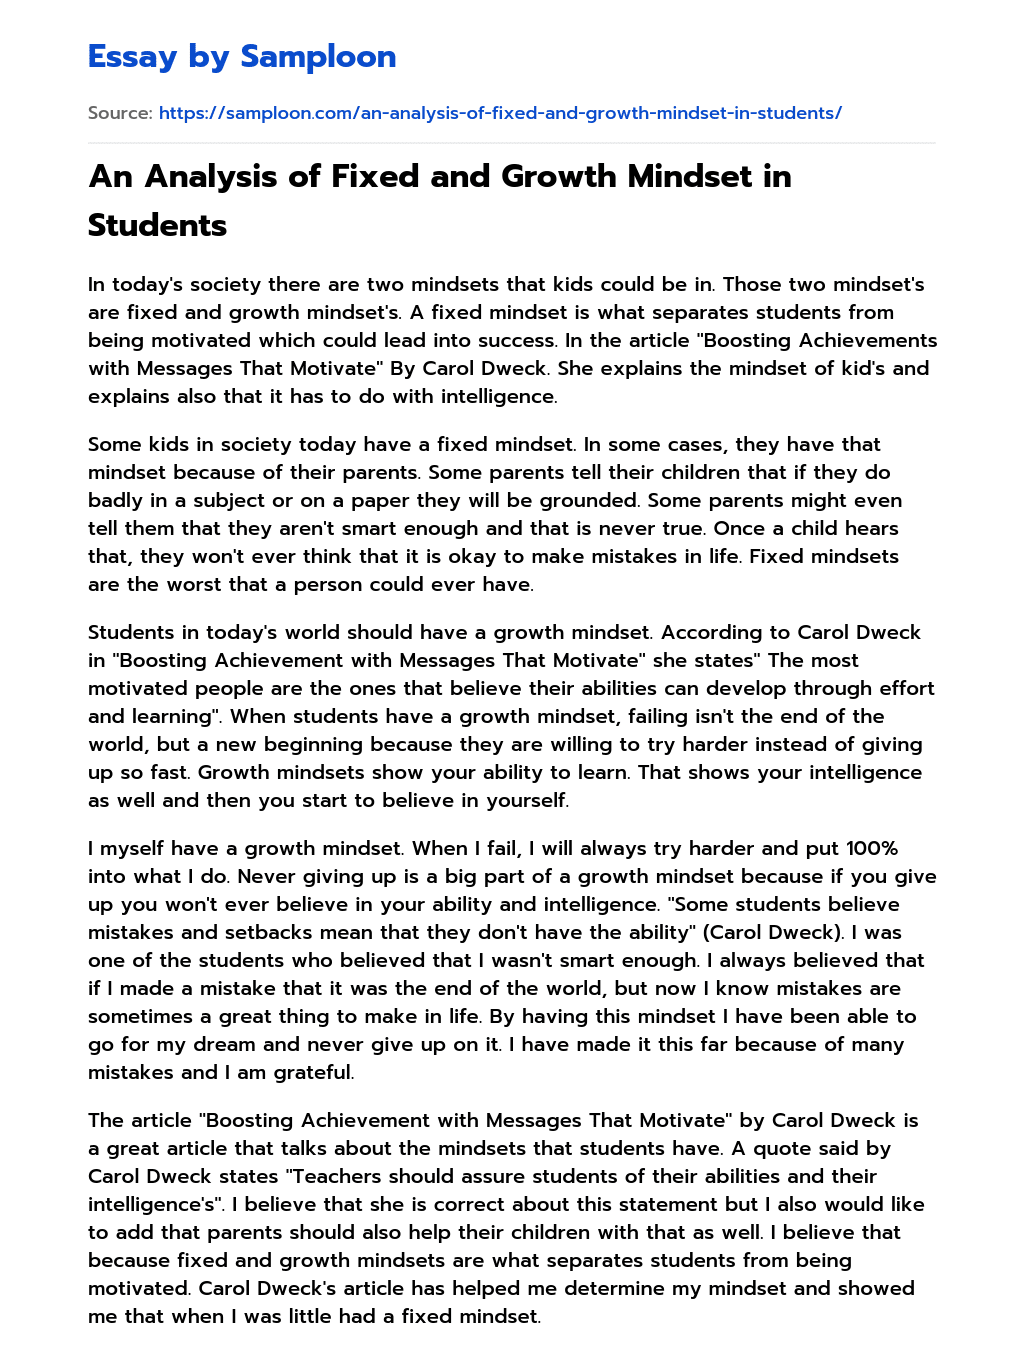 An Analysis of Fixed and Growth Mindset in Students essay